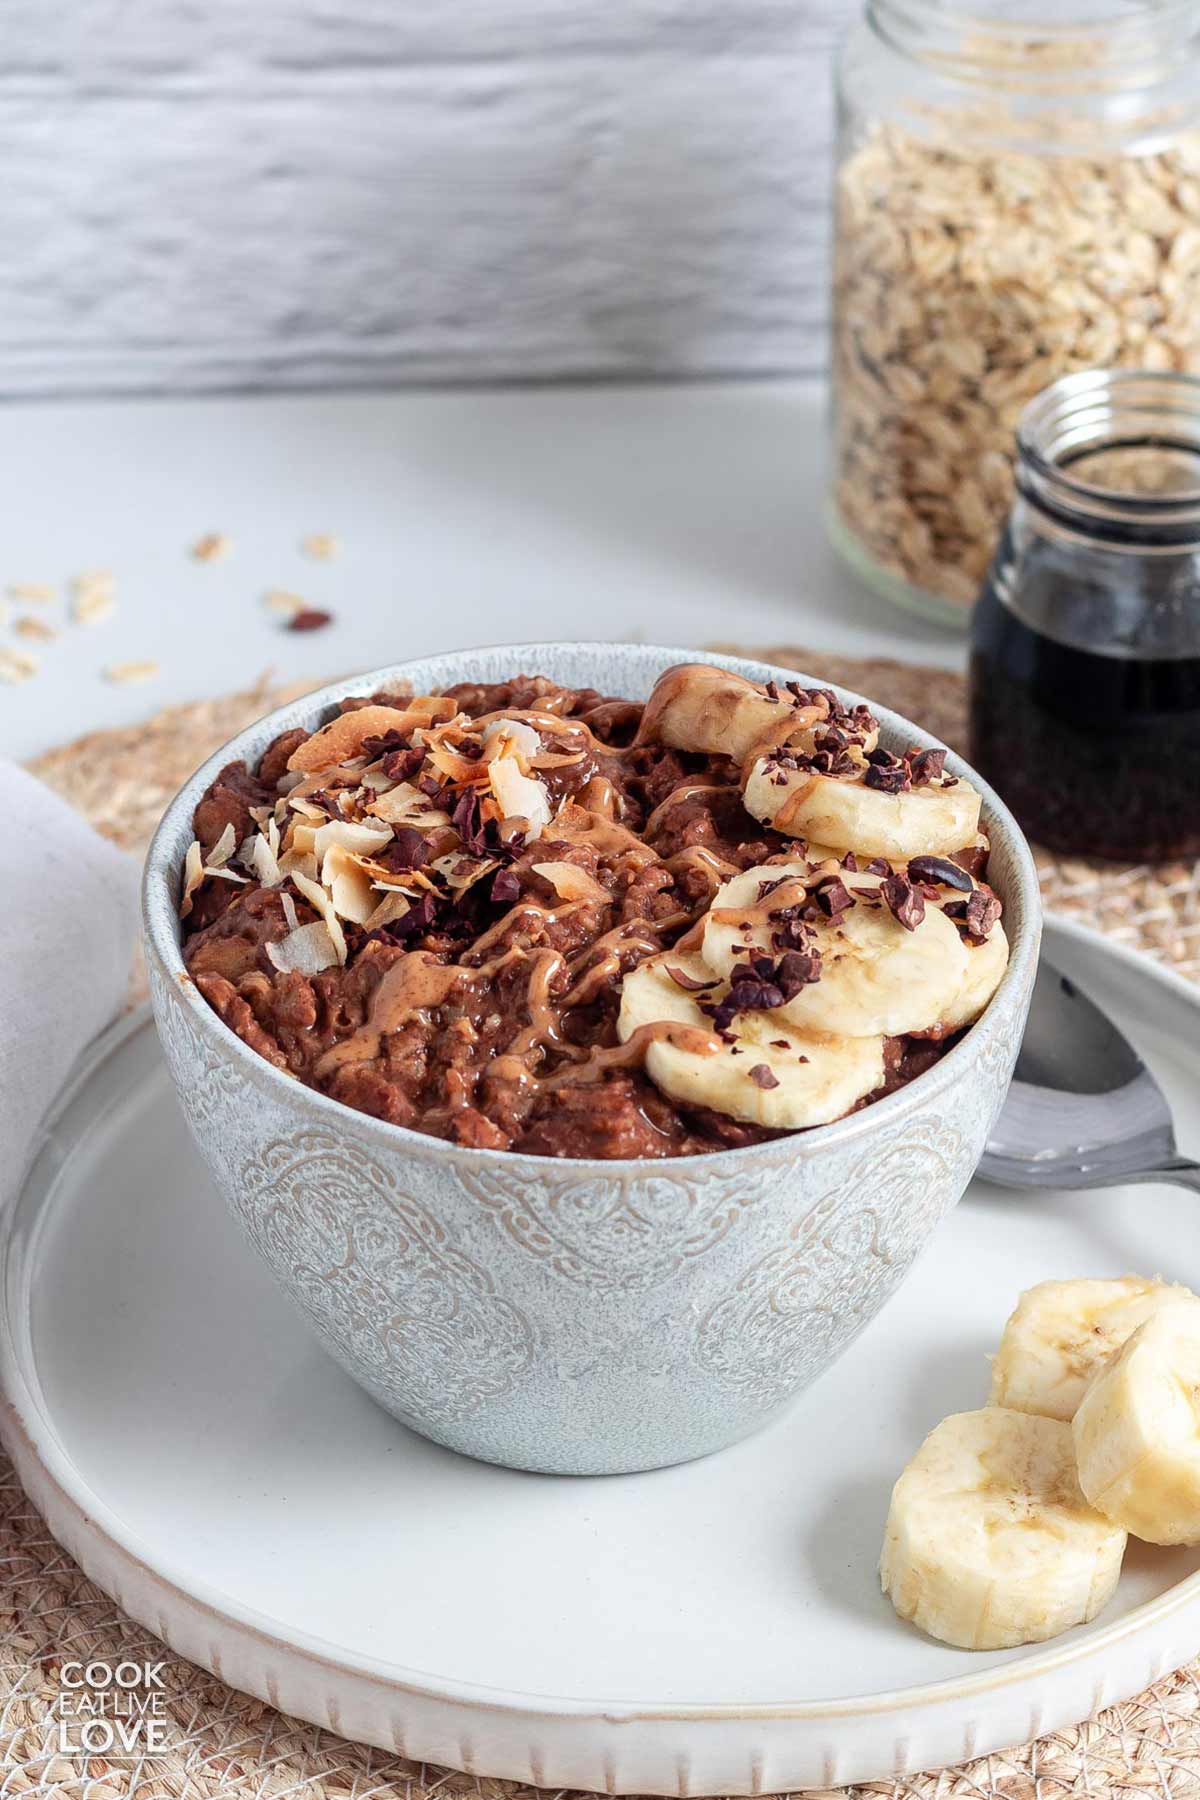 Chocolate oatmeal in a bowl with toppings